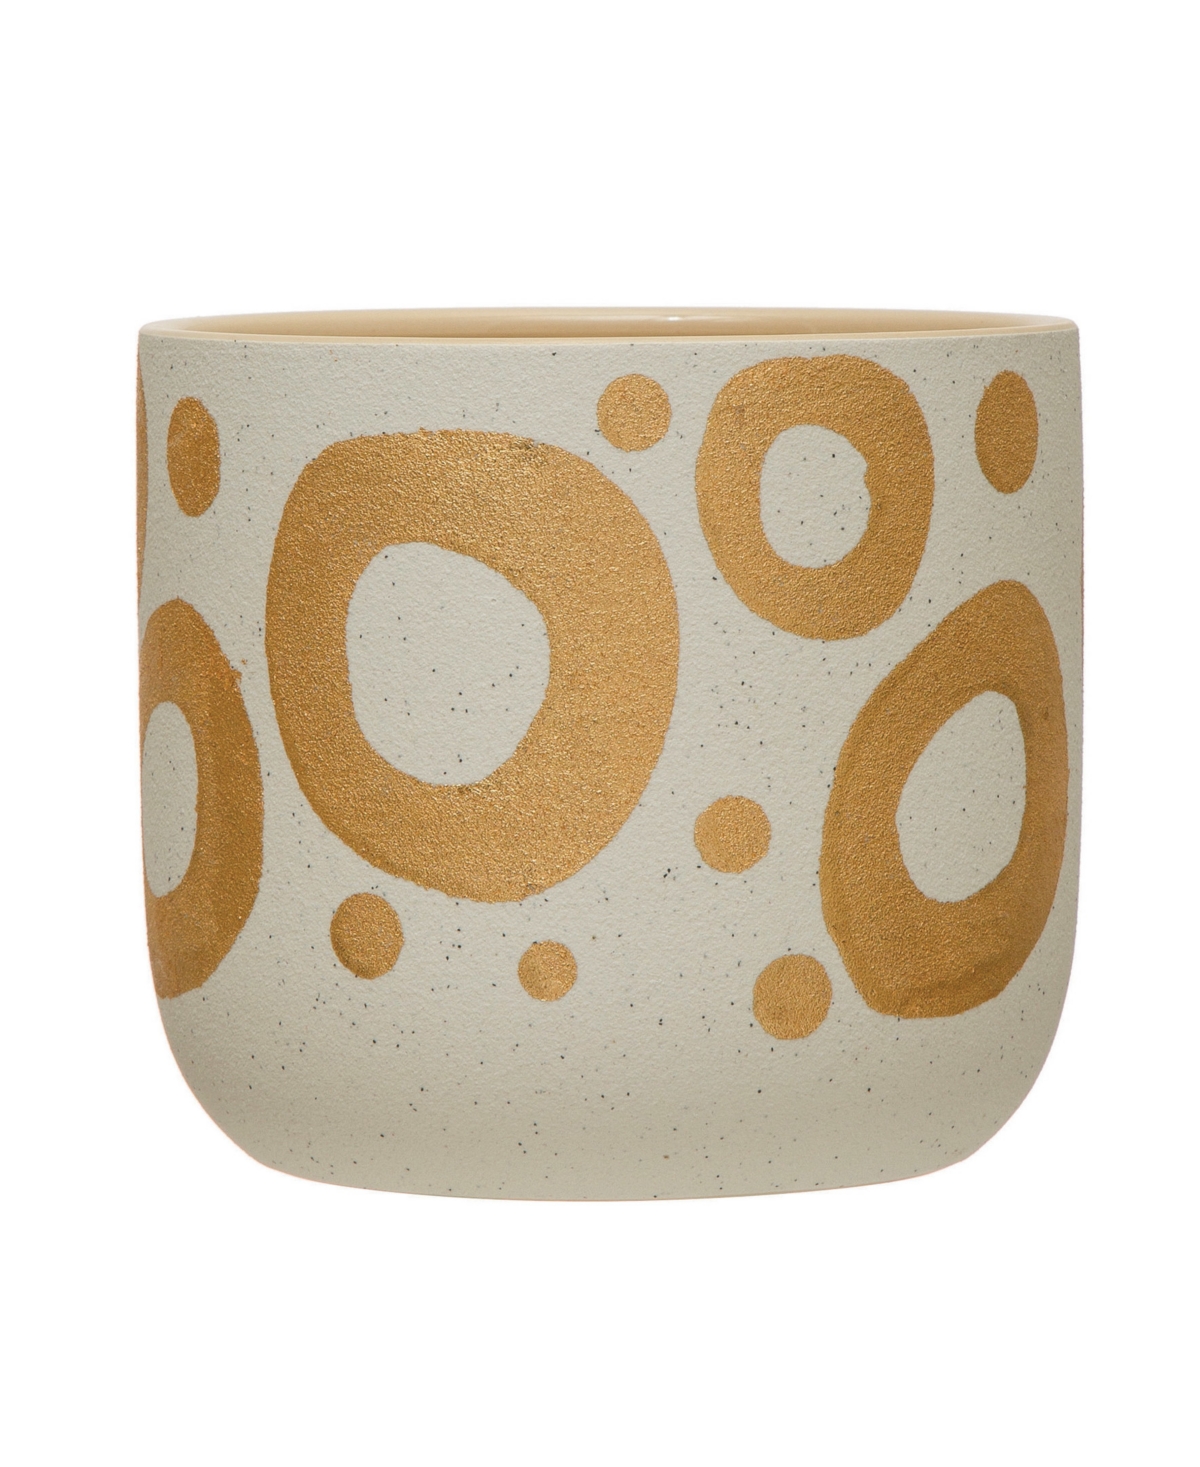 Hand-Painted Stoneware Planter with Gold-Tone Design, Holds 5" Pot - Multicolored